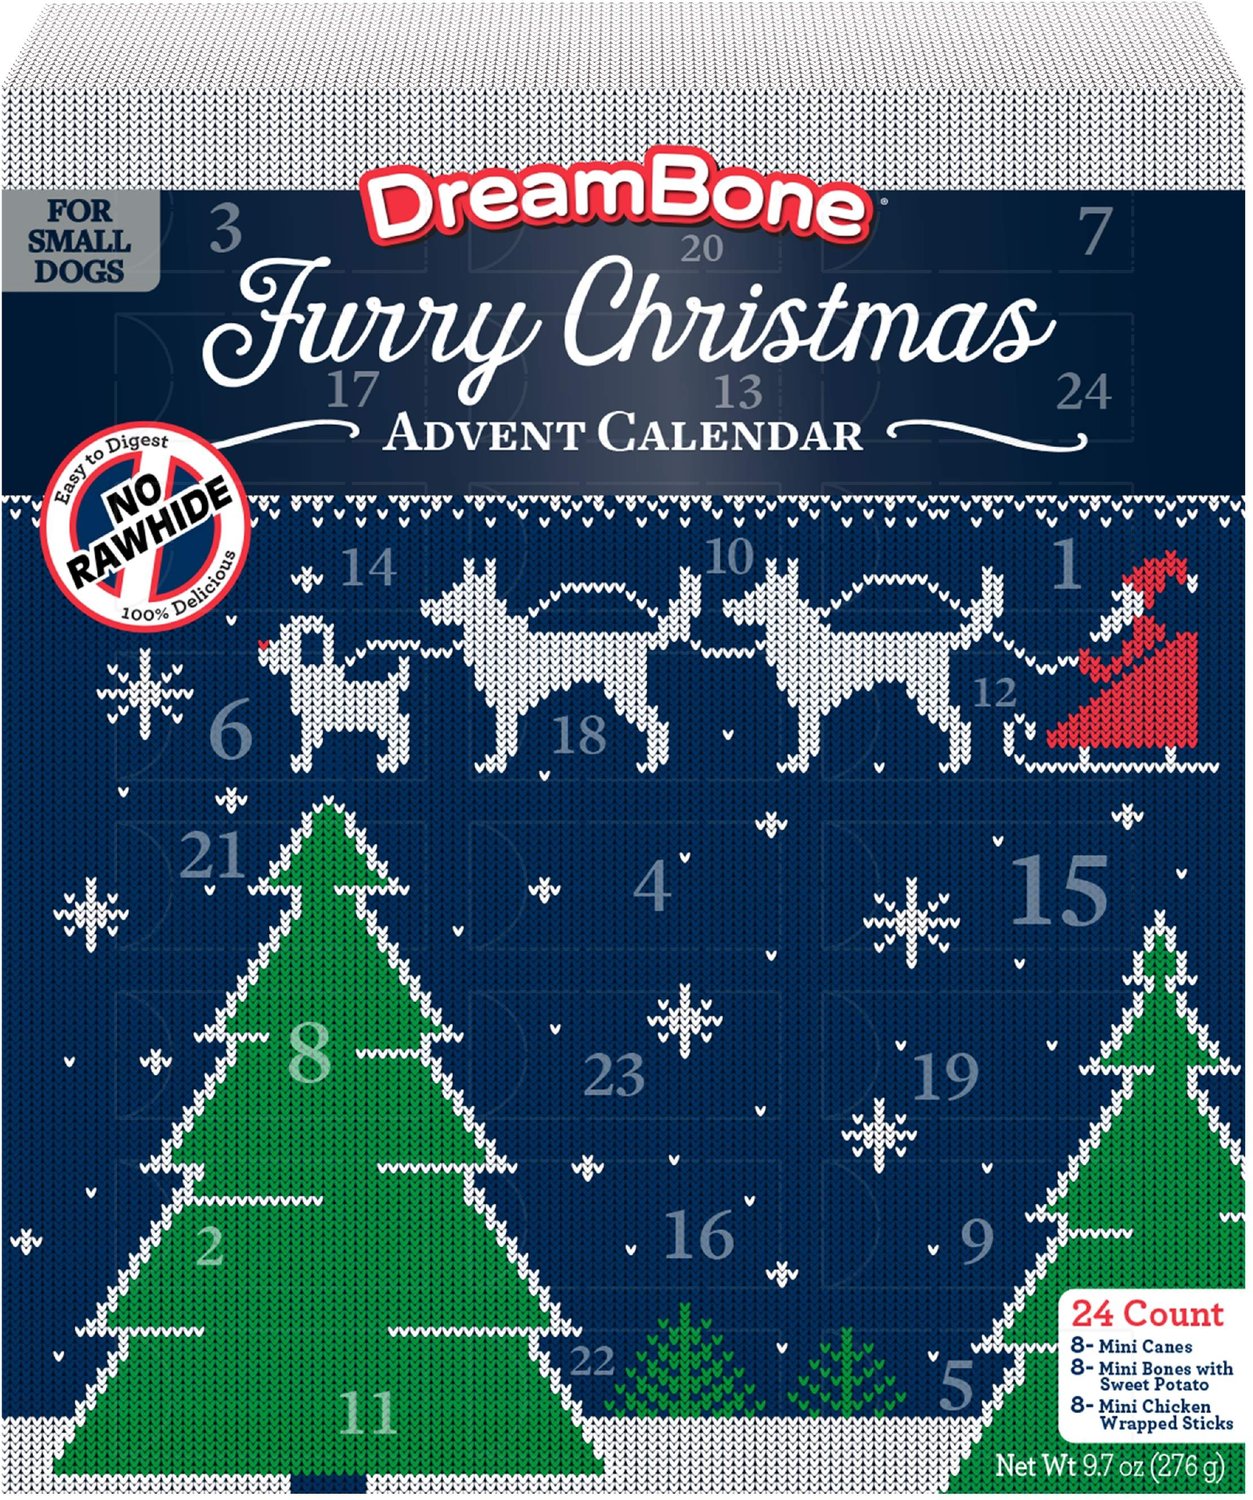 DREAMBONE Furry Christmas Holiday Advent Calendar Variety Pack Dog Treats,  24 count - Chewy.com